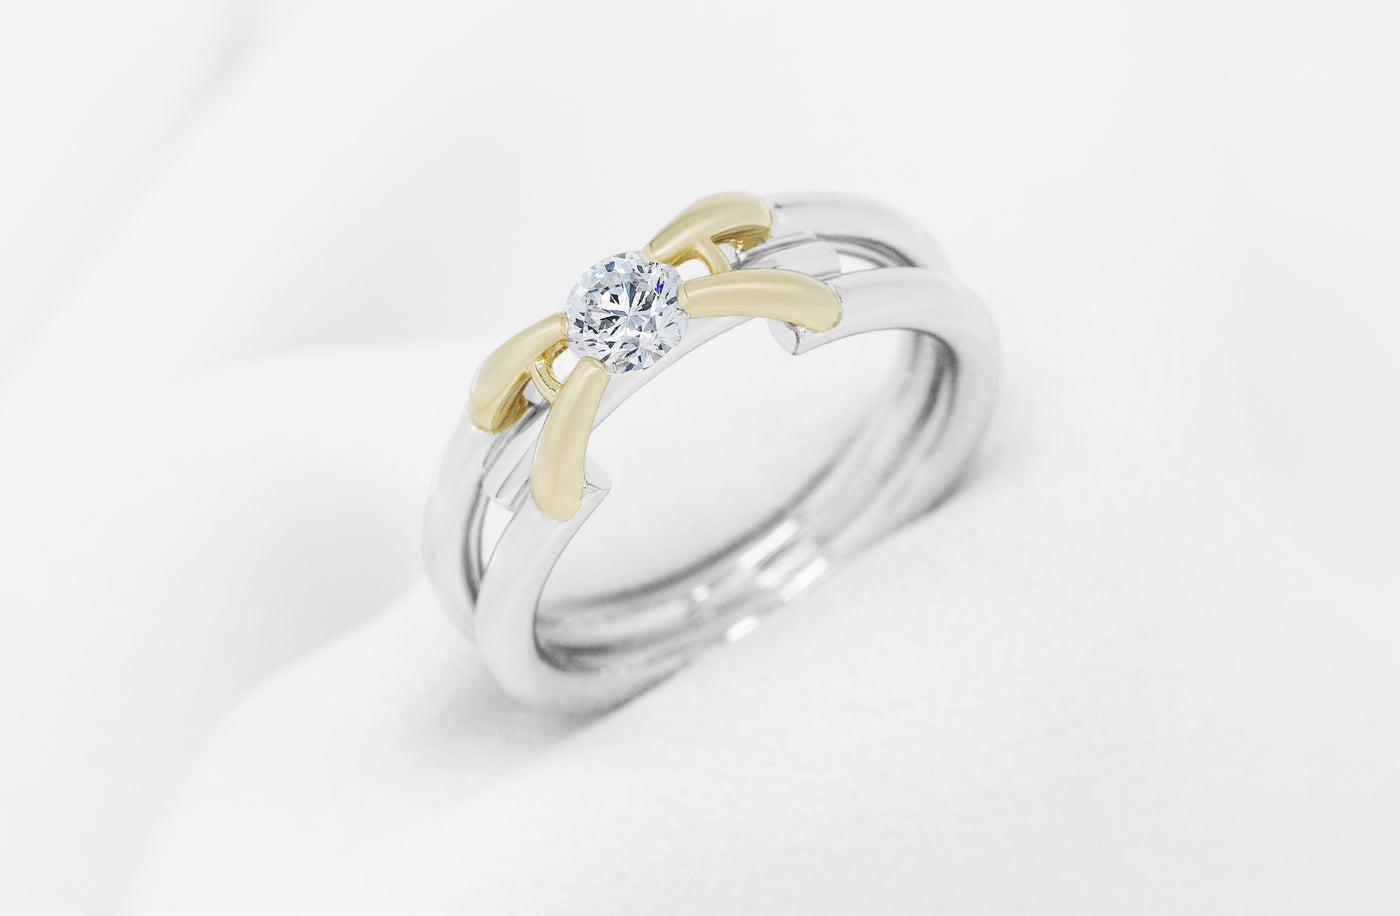 Inspired Collection, Tusk, Elephant, Platinum, 18k, 18ct, White gold yellow gold, brilliant cut, round cut, specialist, contemporary, modern, jewellery, jewelry, engagement ring, ring design, inspired design, tension setting, ready to ship, ready to go, 0.30ct, 0.35ct, 0.40ct, E colour, color, SI1 clarity